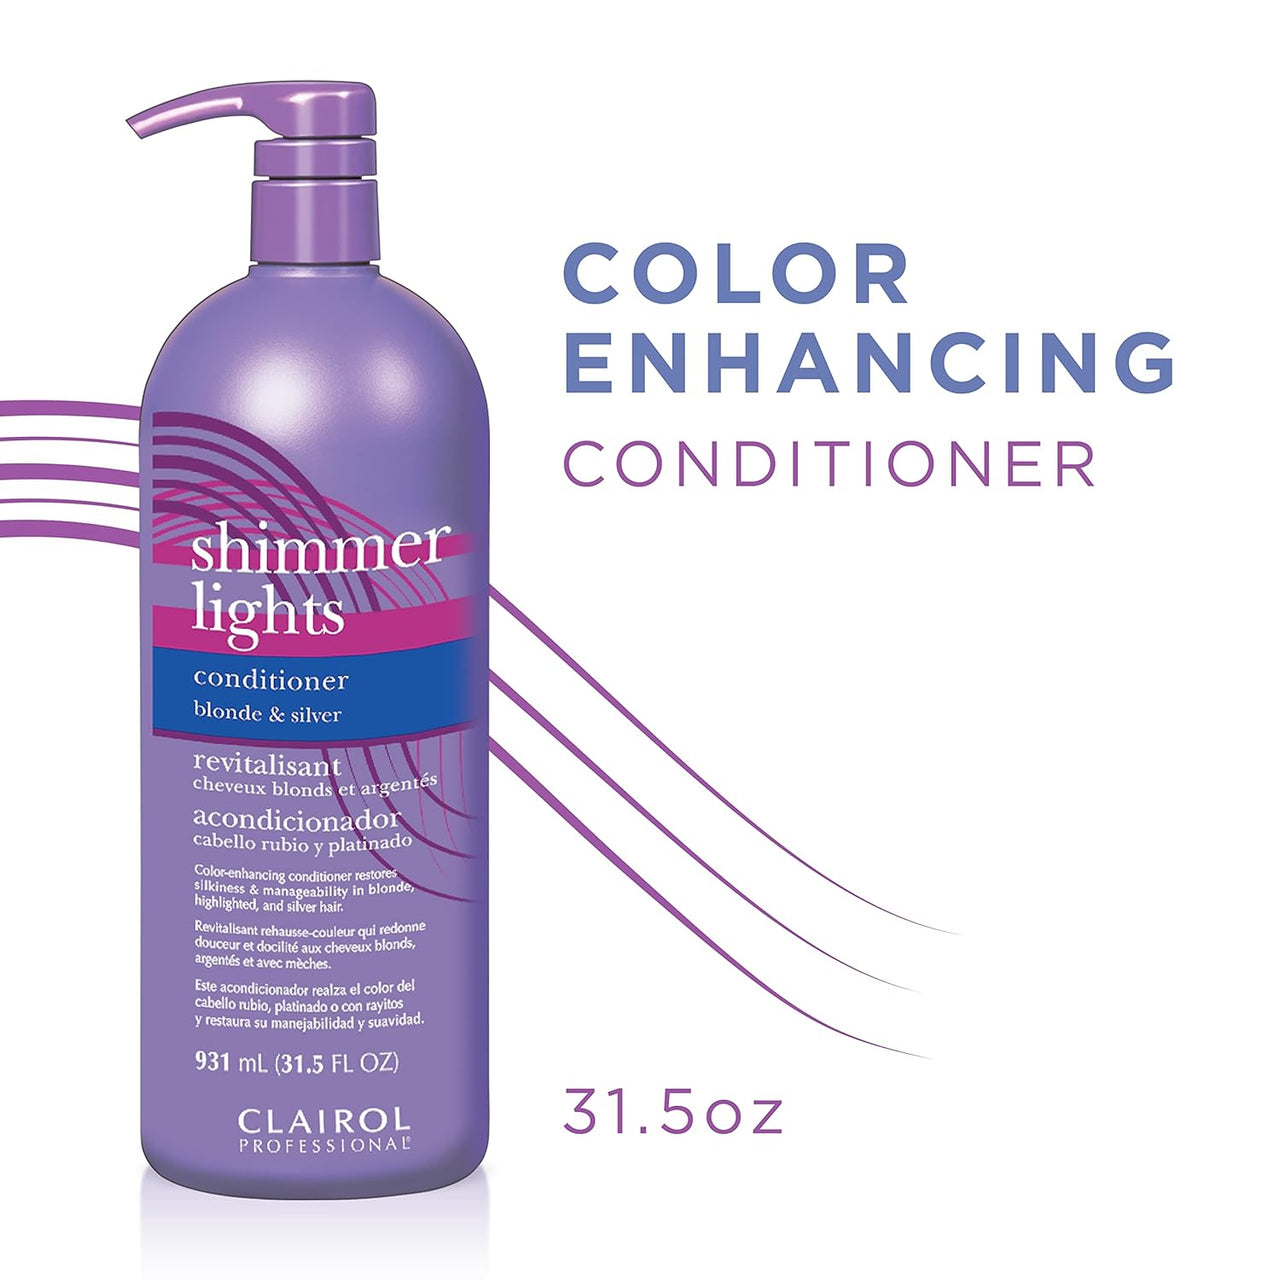 Clairol Professional Shimmer Lights Purple Conditioner, 31.5 fl. Oz Neutralizes Brass & Yellow Tones For Blonde, Silver, Gray & Highlighted Hair